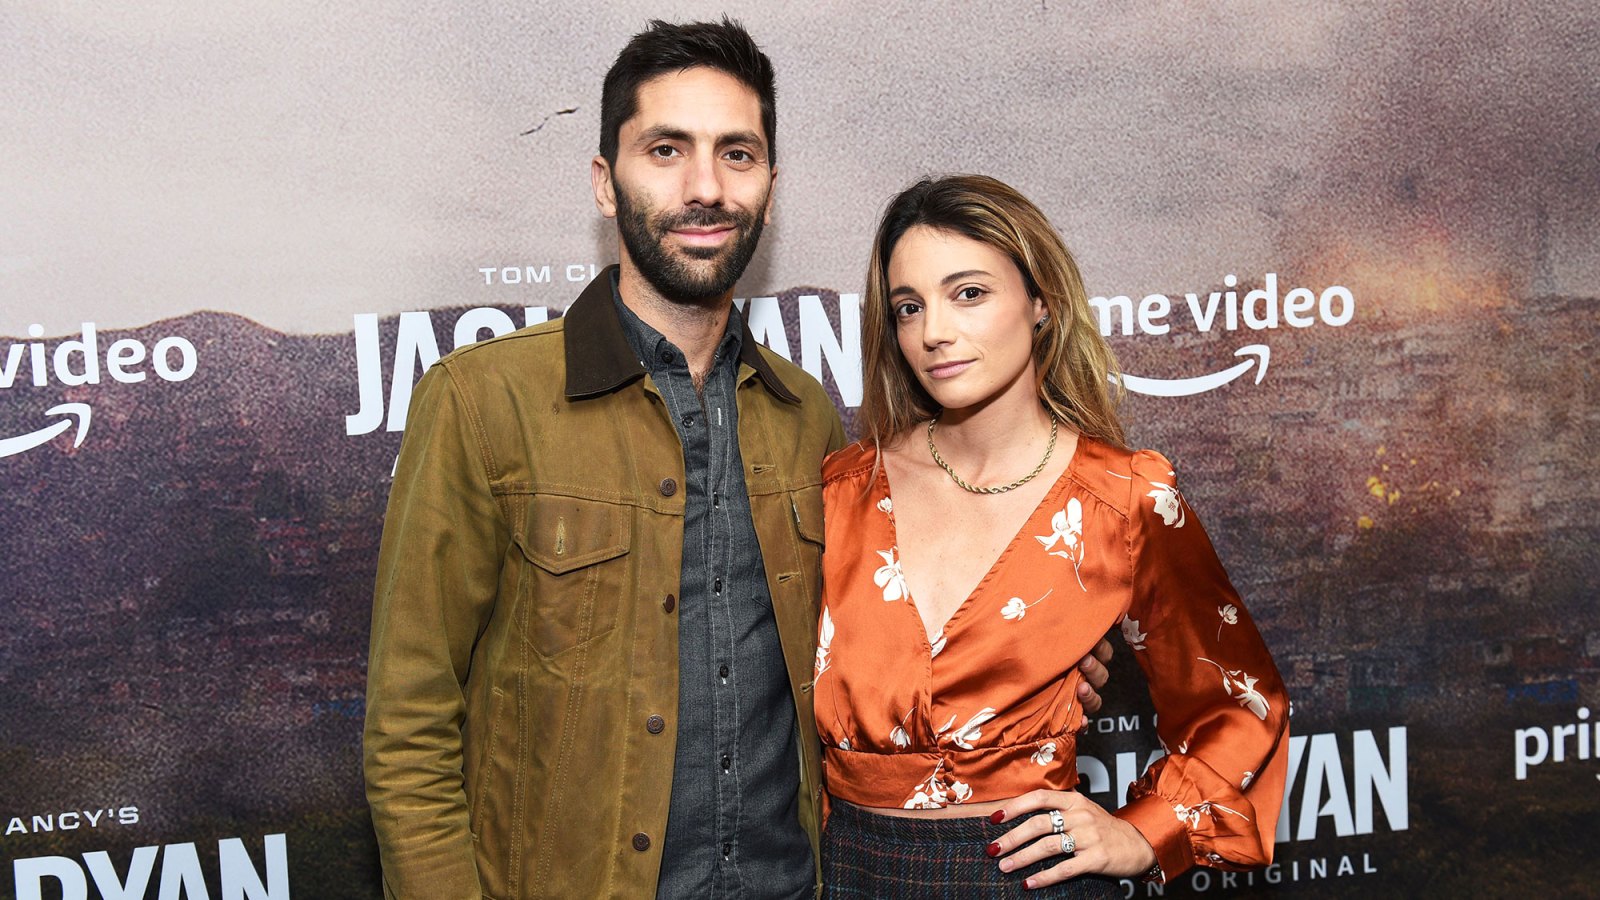 Nev Schulman’s Wife Laura Perlongo Reveals She Suffered a Miscarriage